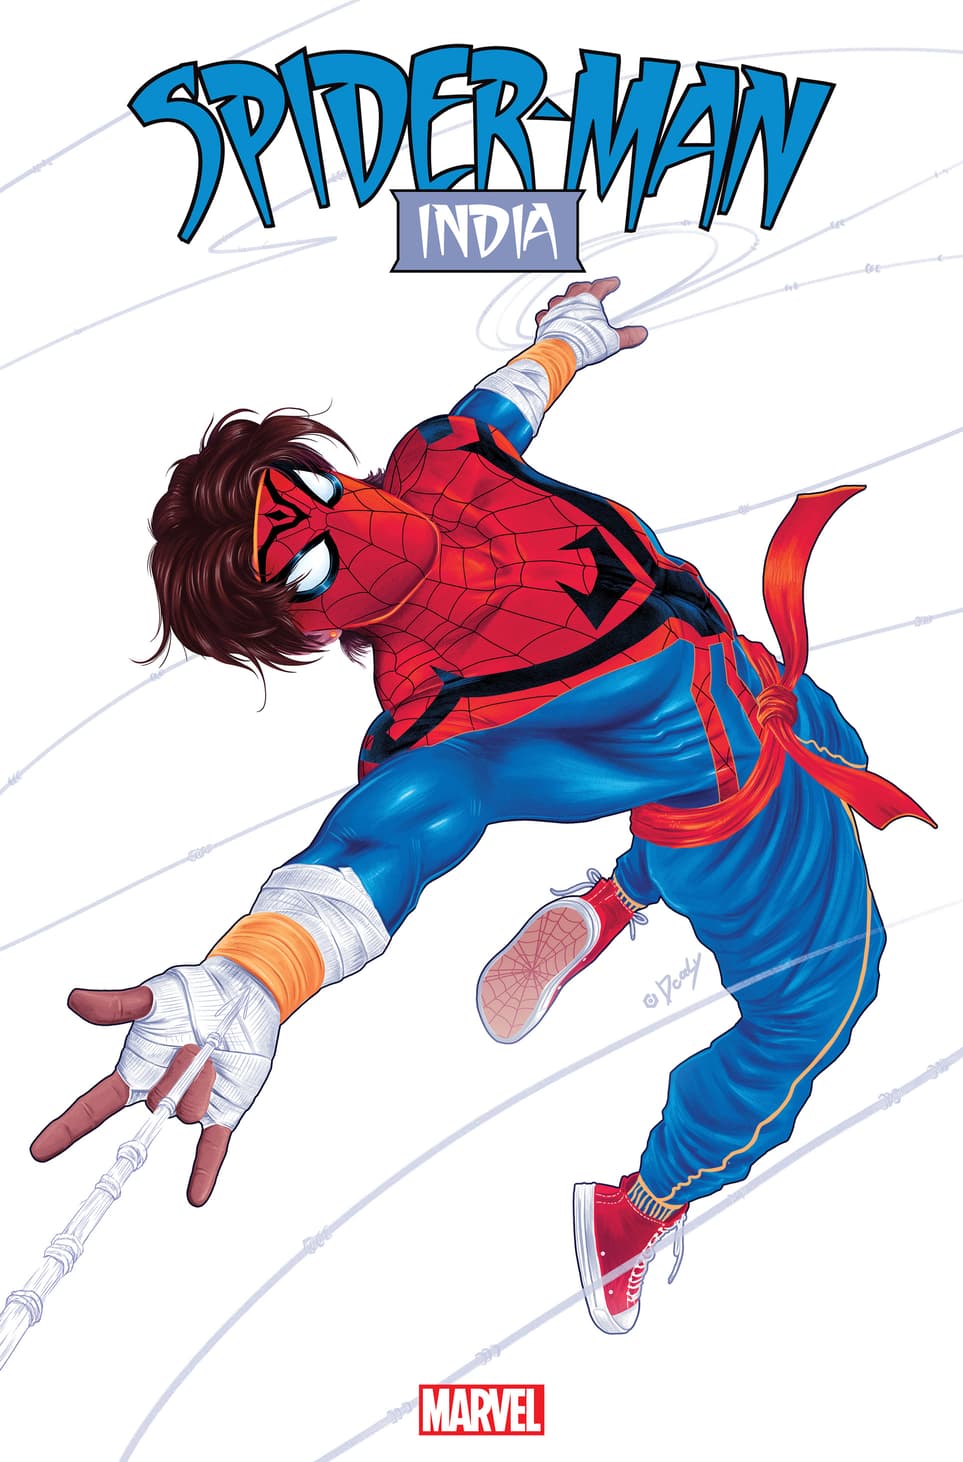 SPIDER-MAN: INDIA #5 New Costume Variant Cover by Doaly